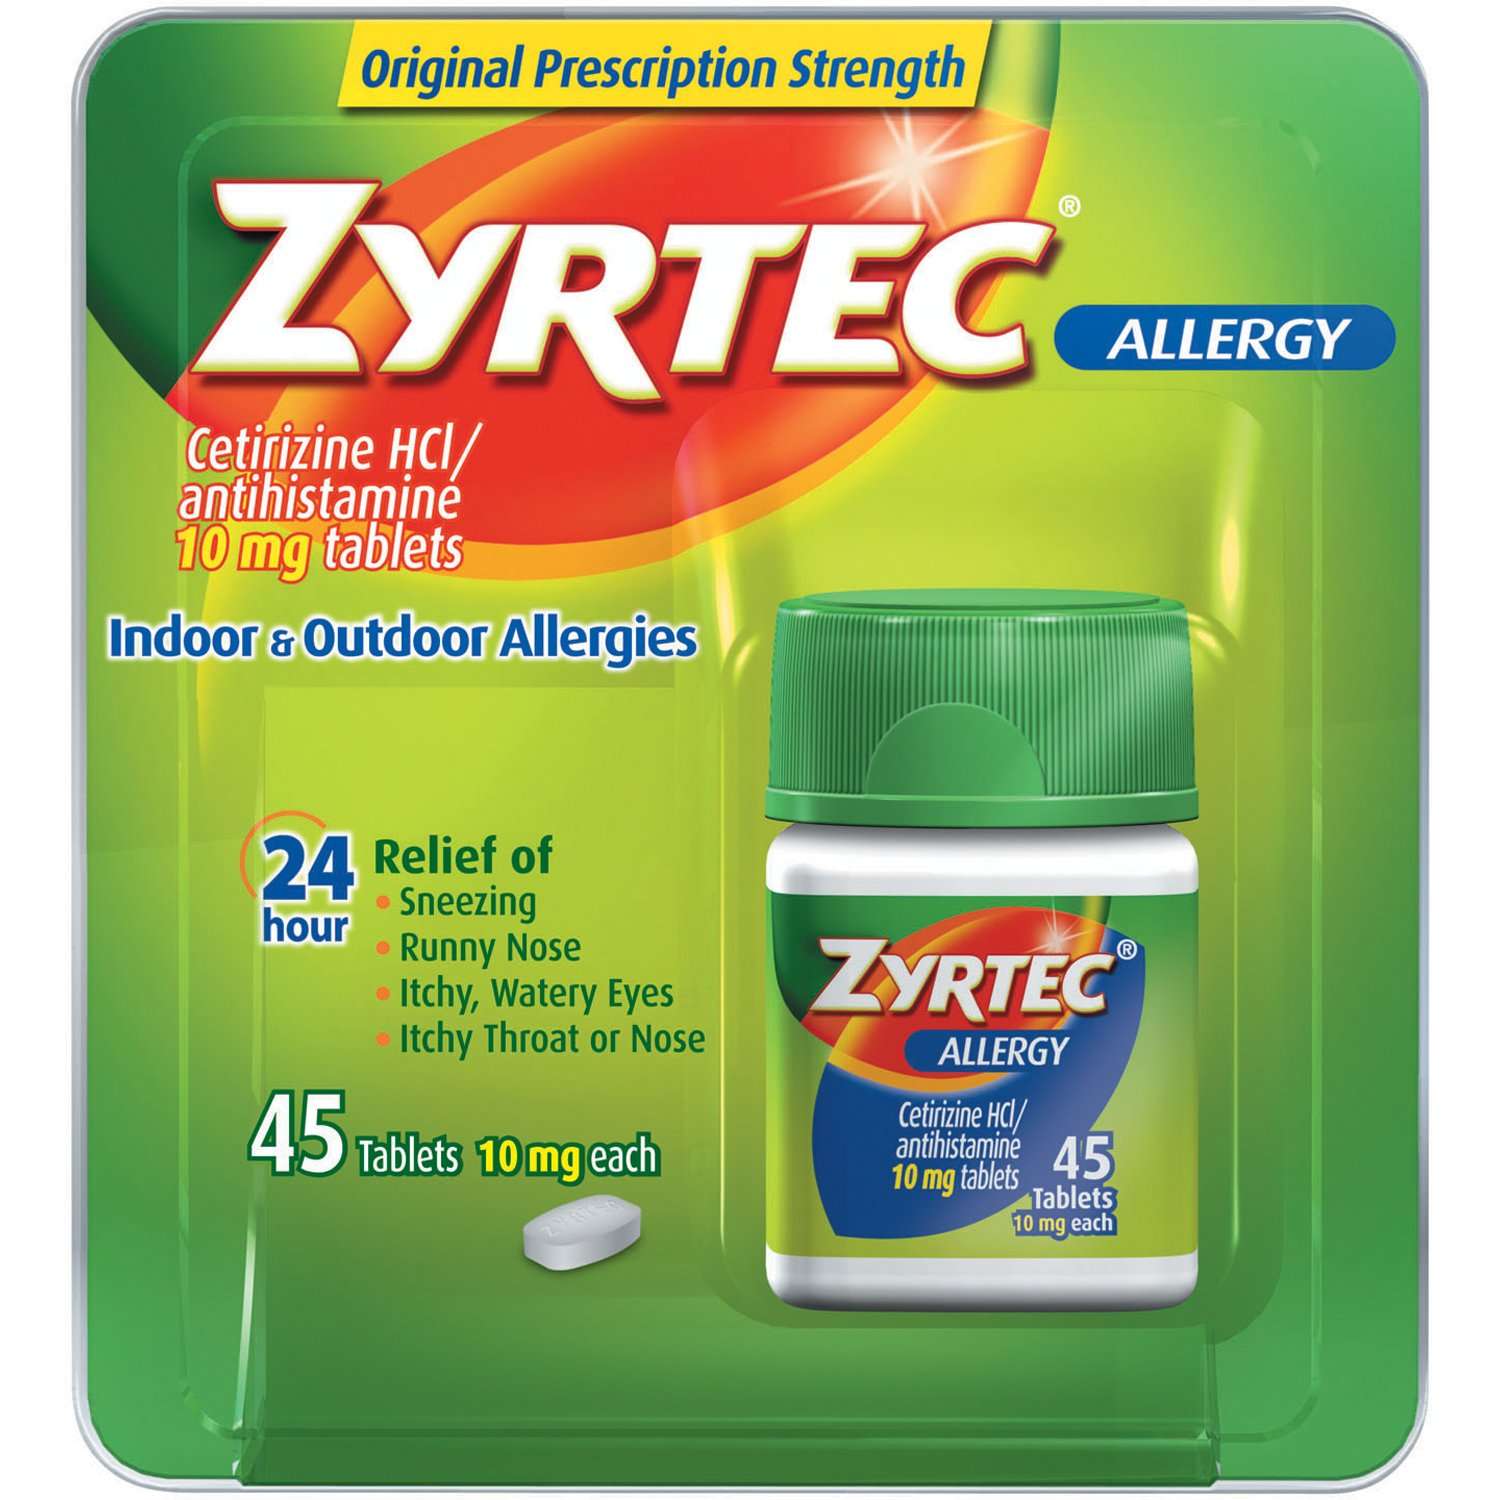 Zyrtec Allergy, Tablets, 45 tablets